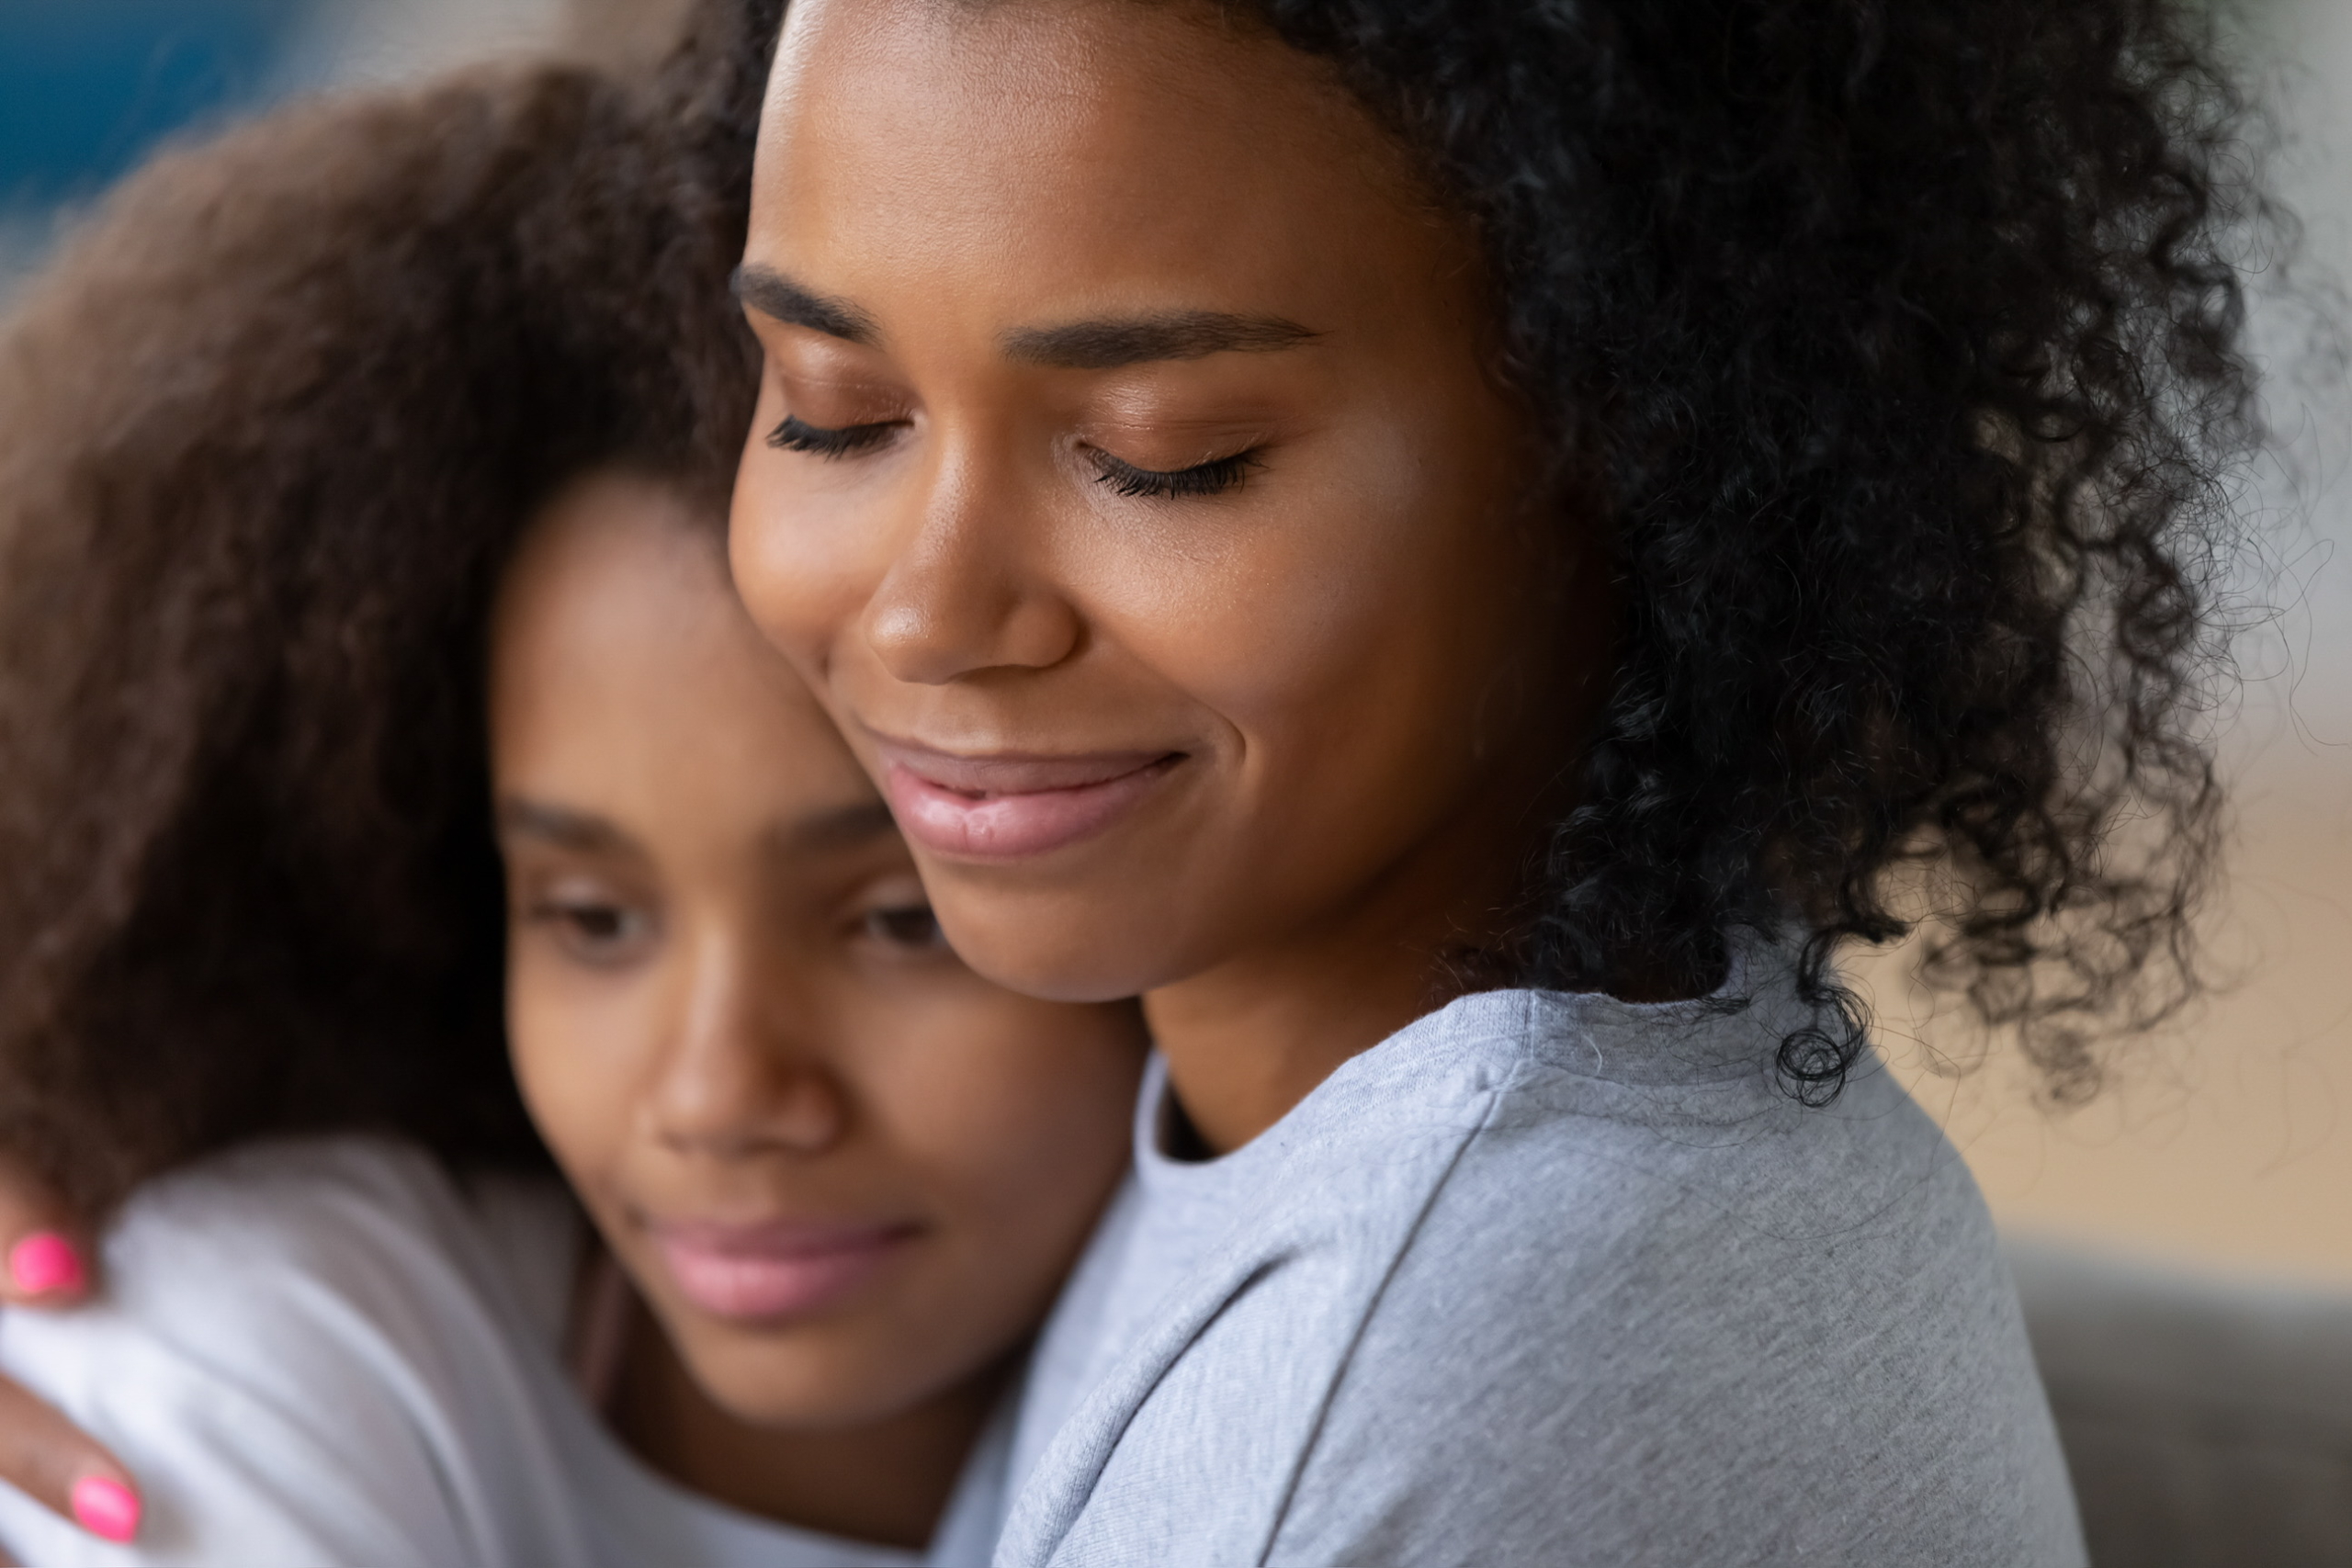 Key Takeaways to Protect Your Teen’s Mental Health